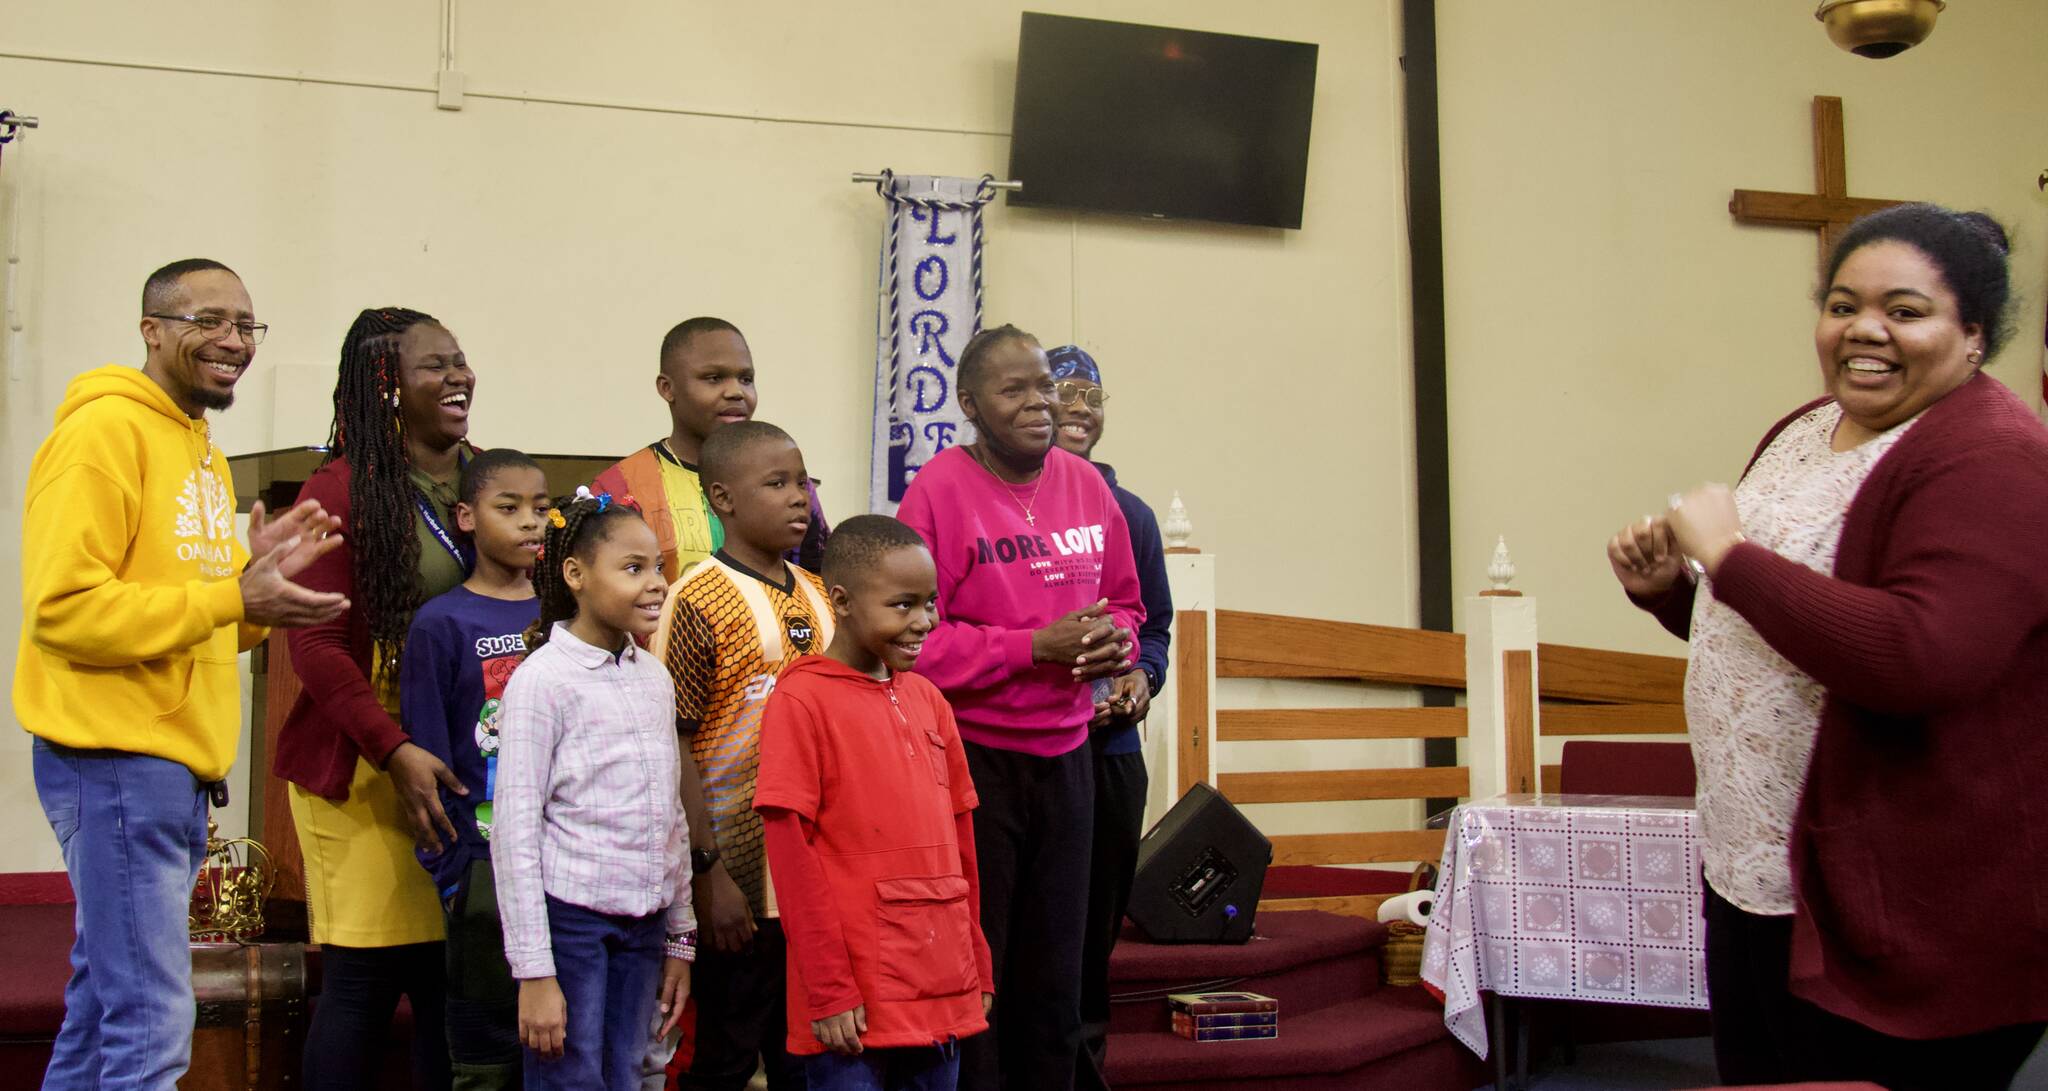 Nicole Rice, at right, leads a rehearsal for the annual Martin Luther King Jr. event at the House of Prayer. (Photo by Rachel Rosen/Whidbey News-Times)